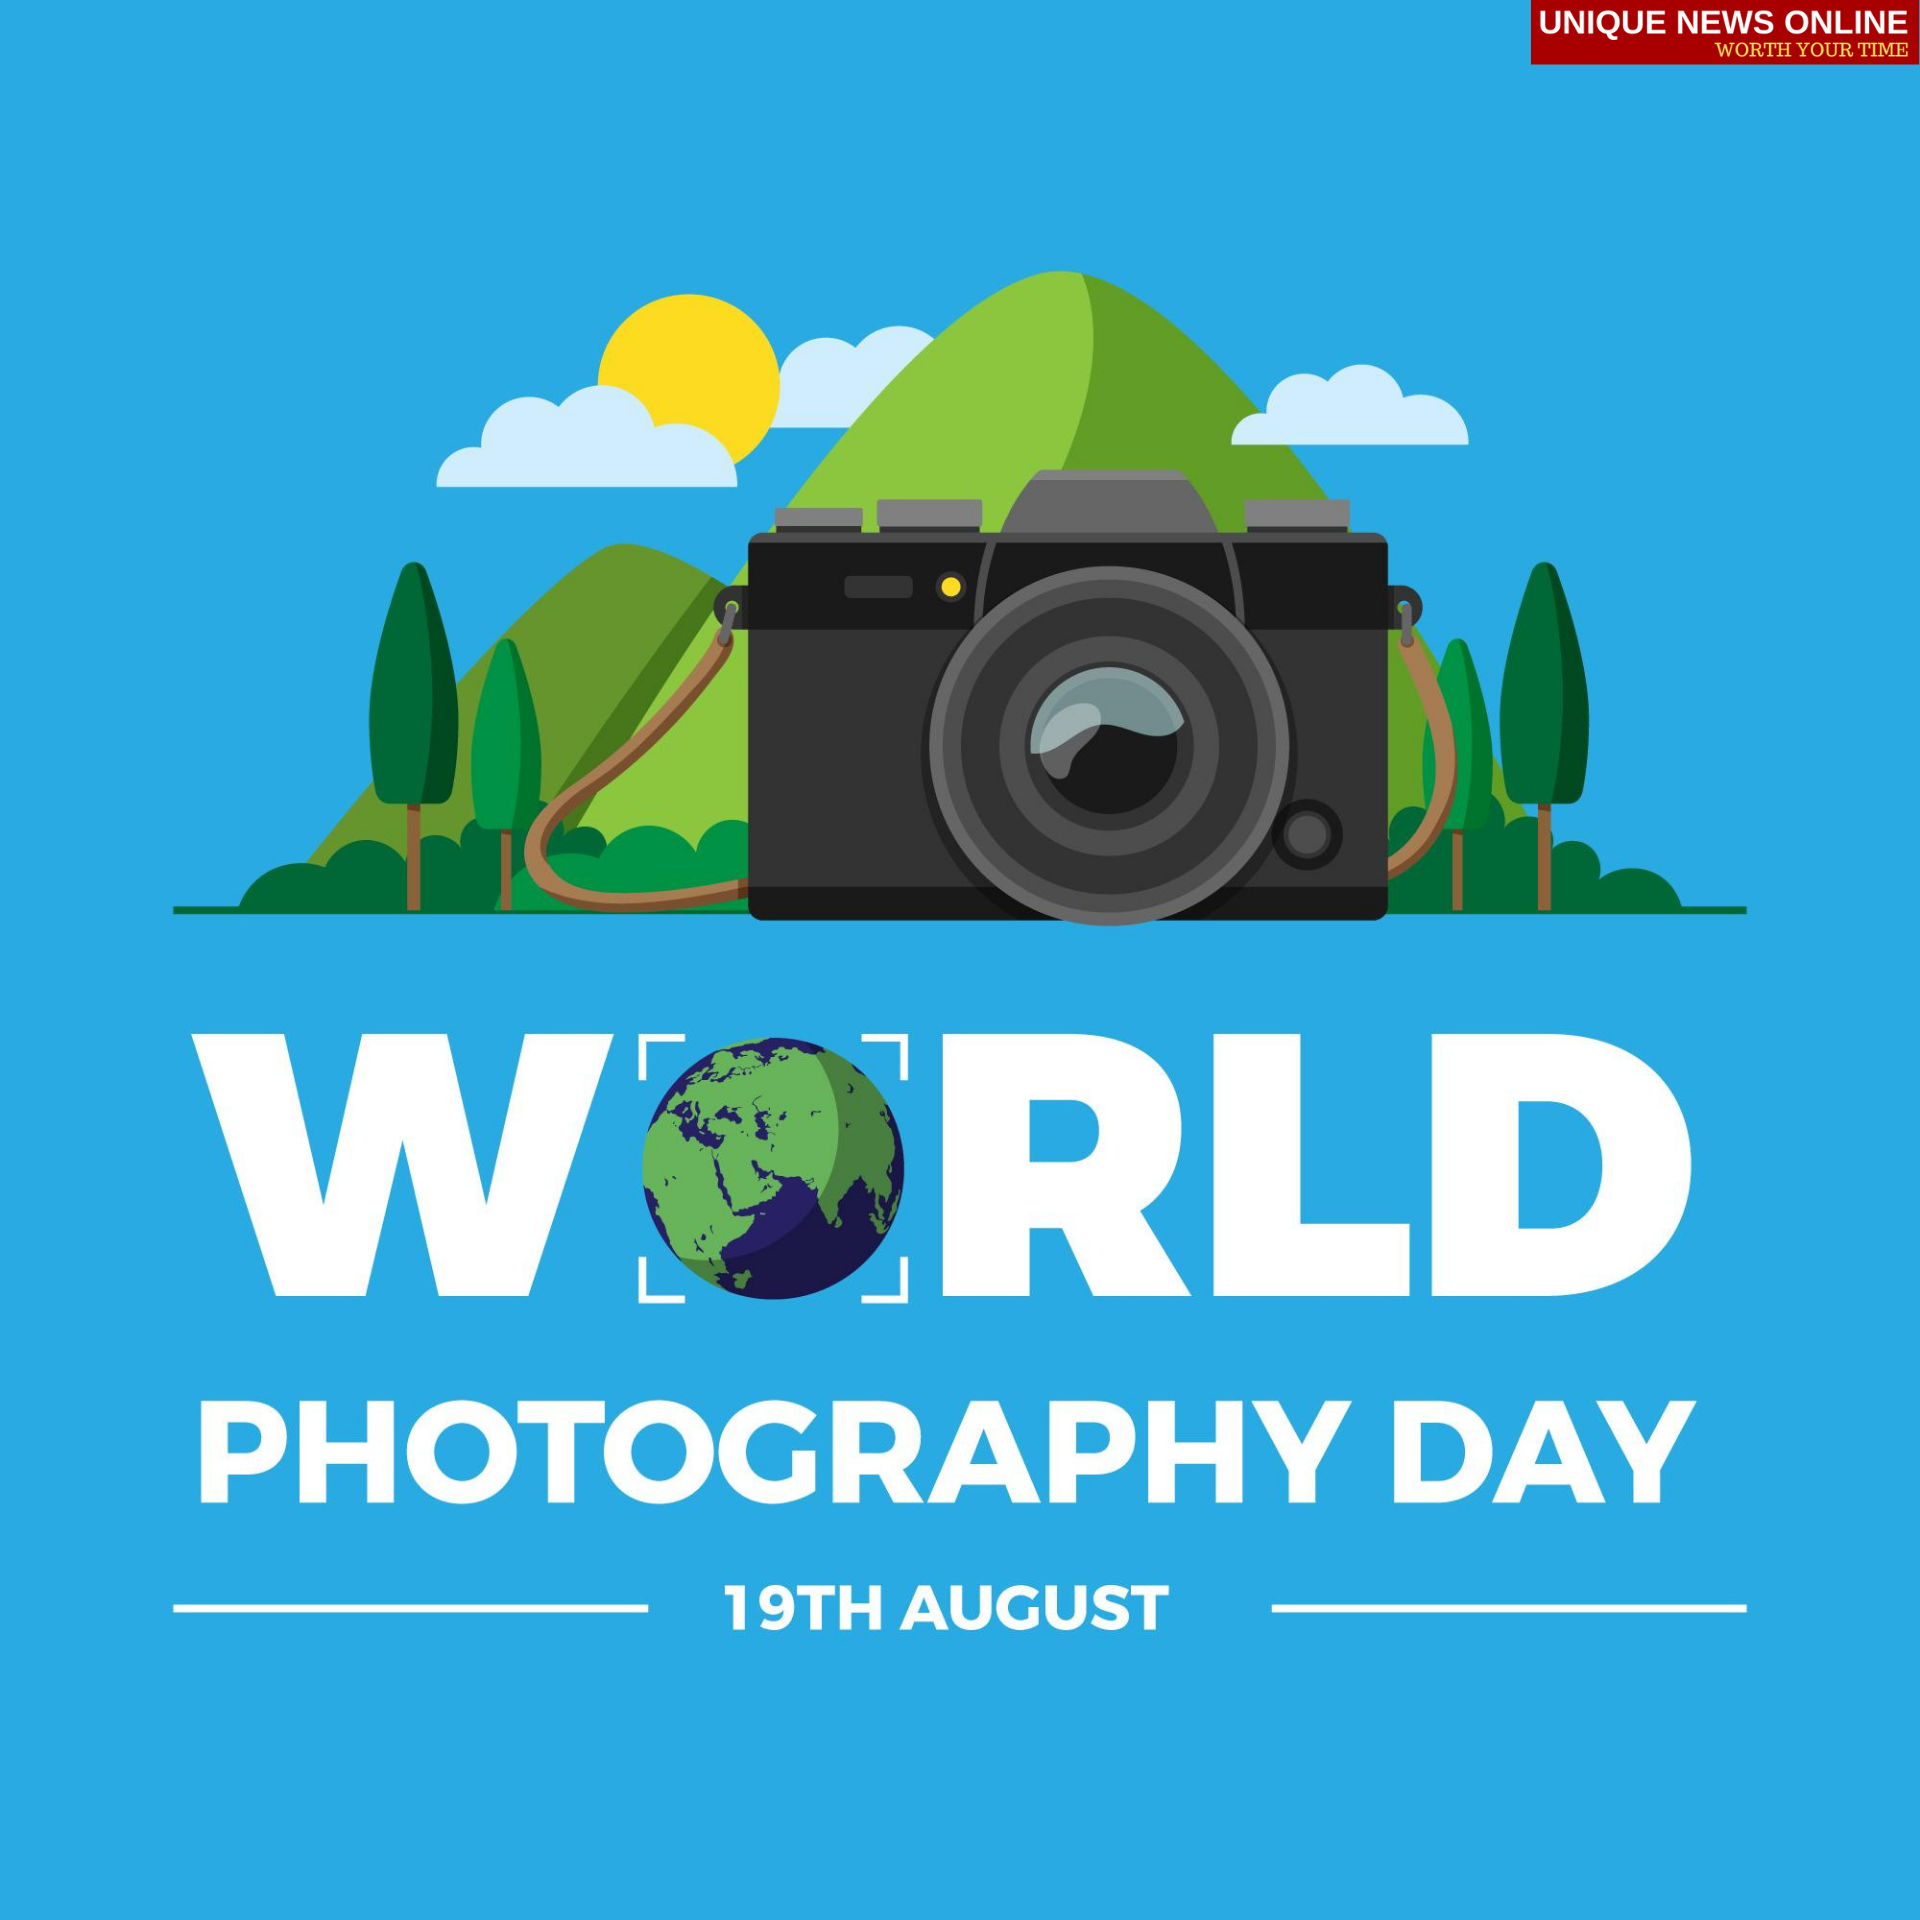 World Photography Day 2021 Quotes, HD Images, Poster, Wishes, and WhatsApp Status to greet any photographer friends, and relatives